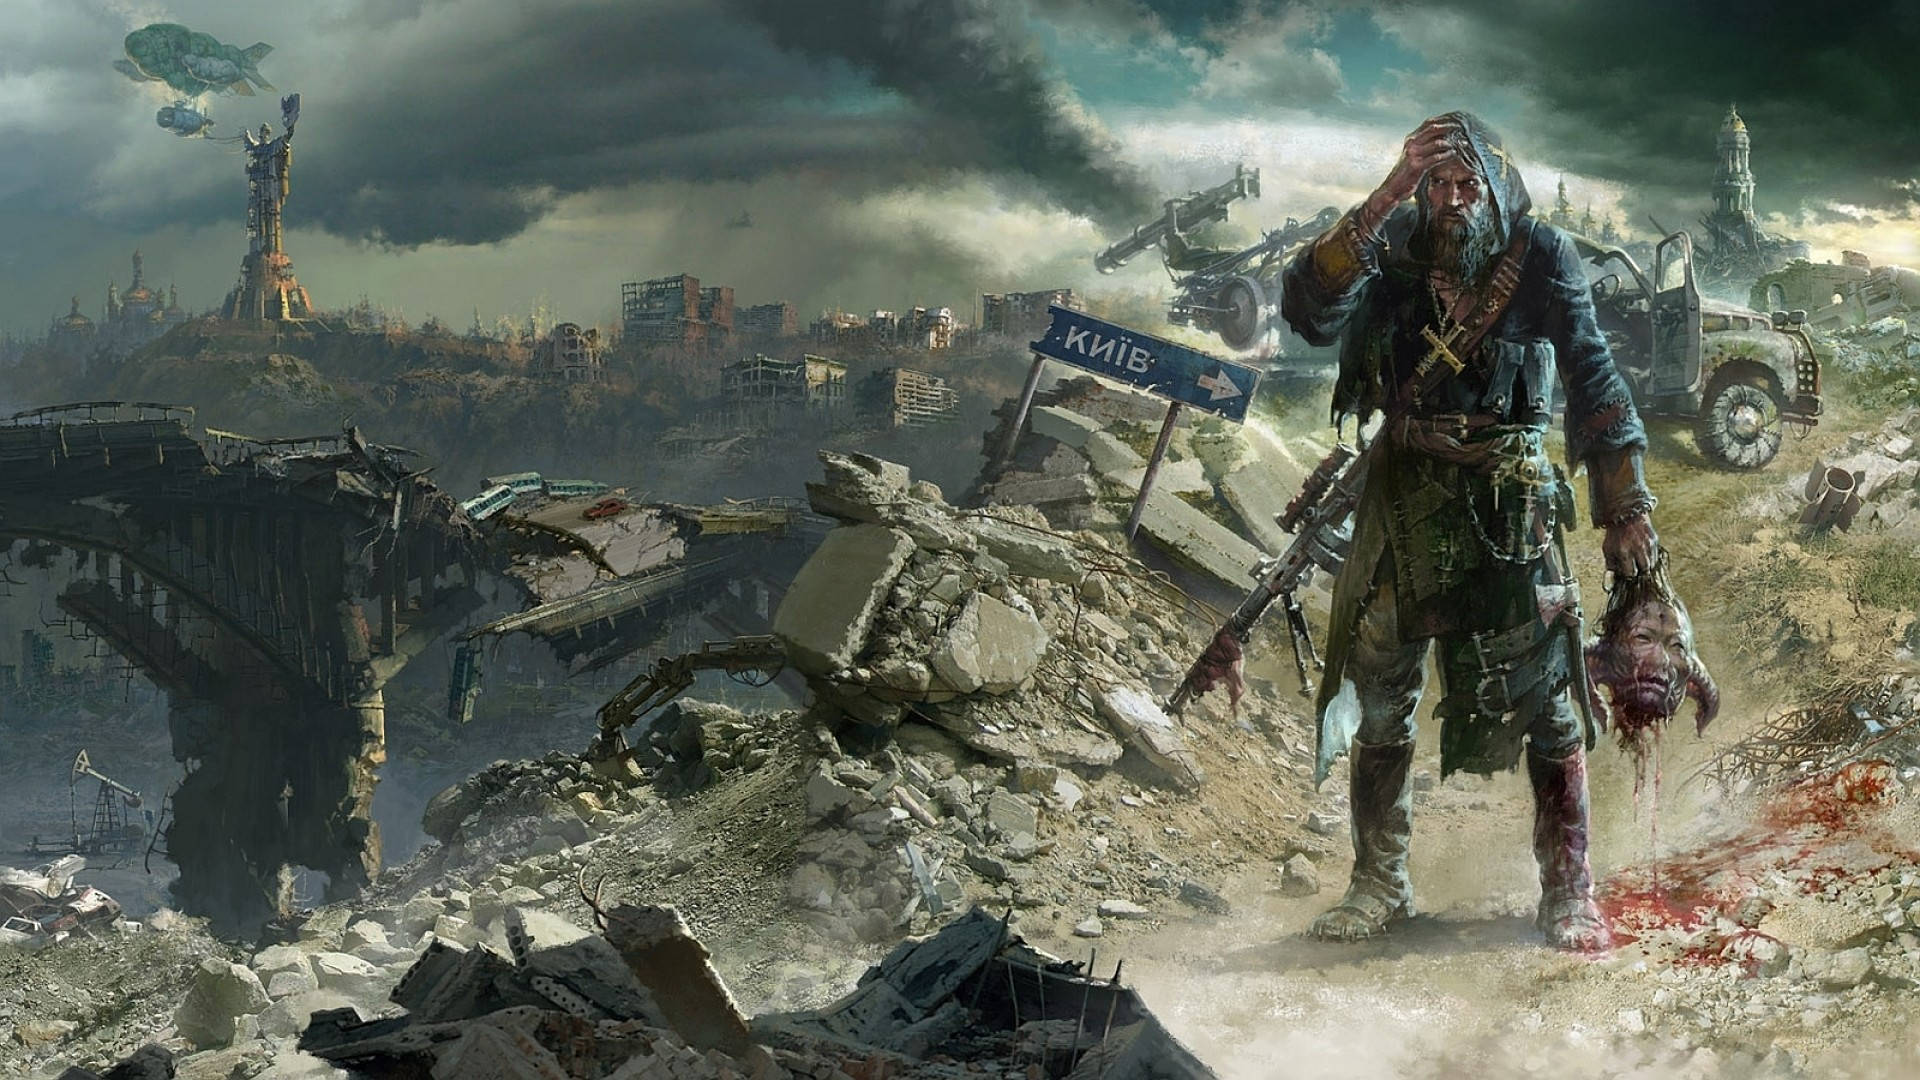 Prepare for the worst, the Zombie Apocalypse is here. Wallpaper